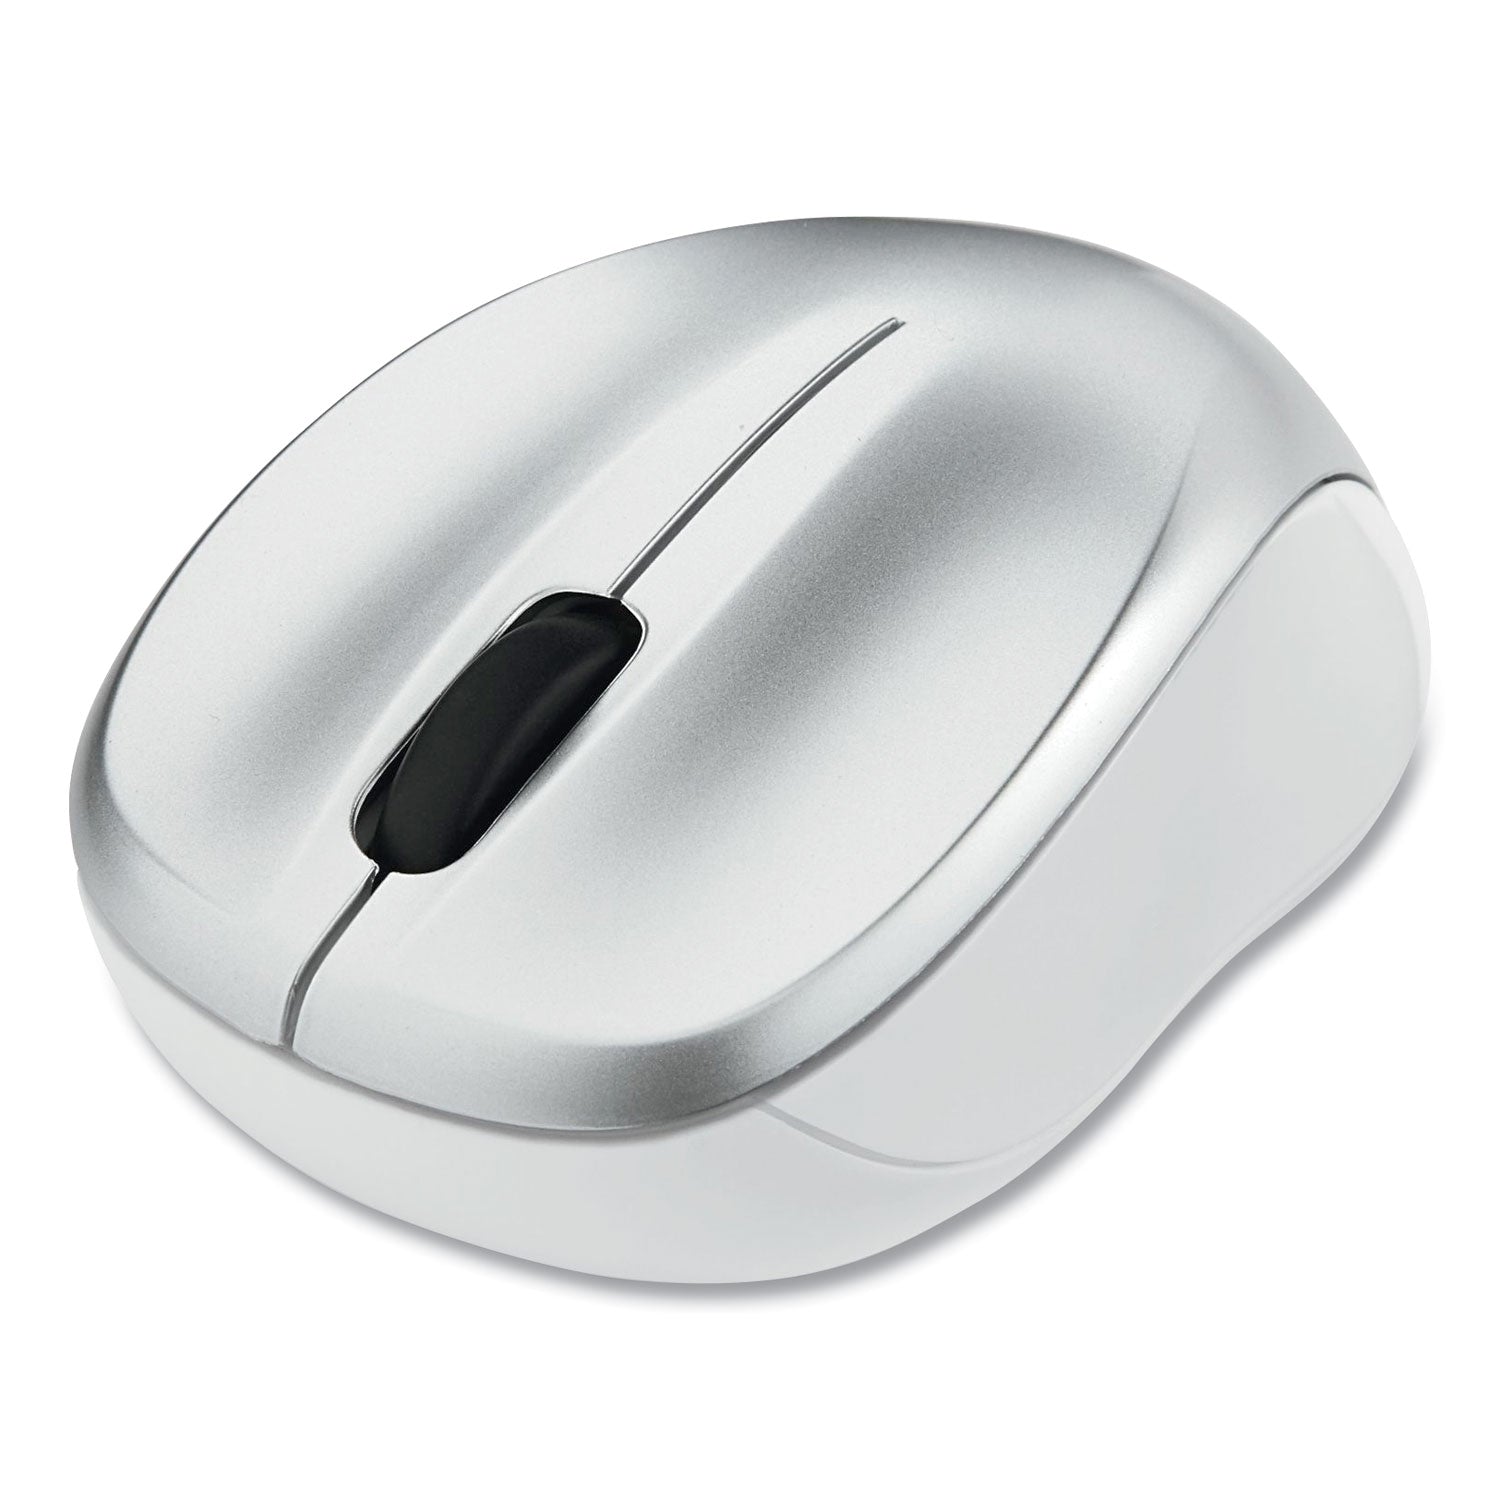 silent-wireless-blue-led-mouse-24-ghz-frequency-328-ft-wireless-range-left-right-hand-use-silver_ver99777 - 1